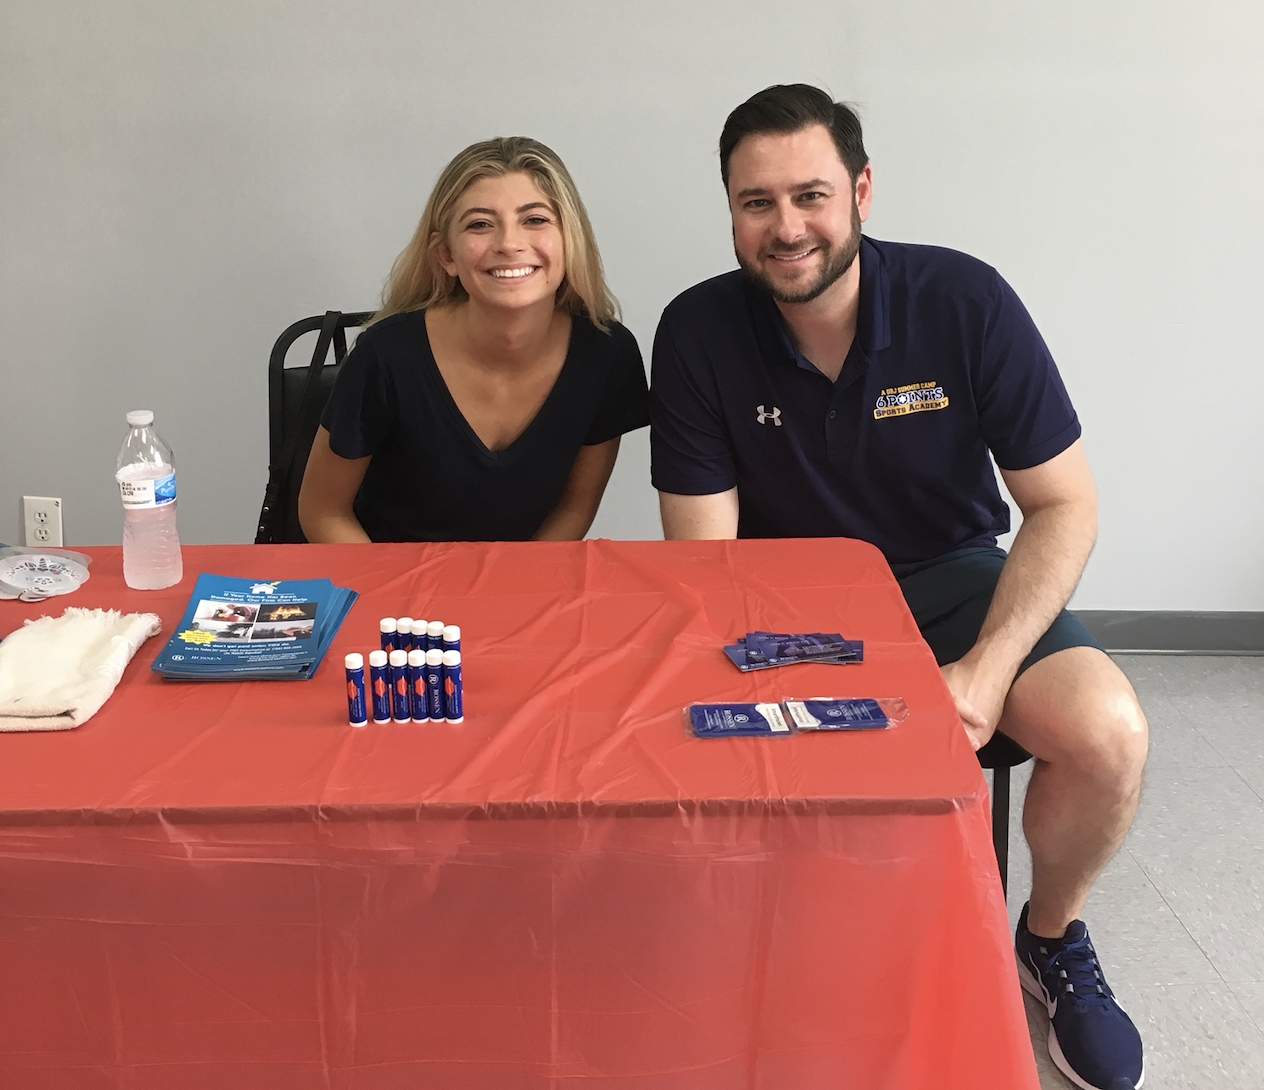 Criminal lawyer adam rossen with marketing assistant Olivia at a community event in coconut creek, florida